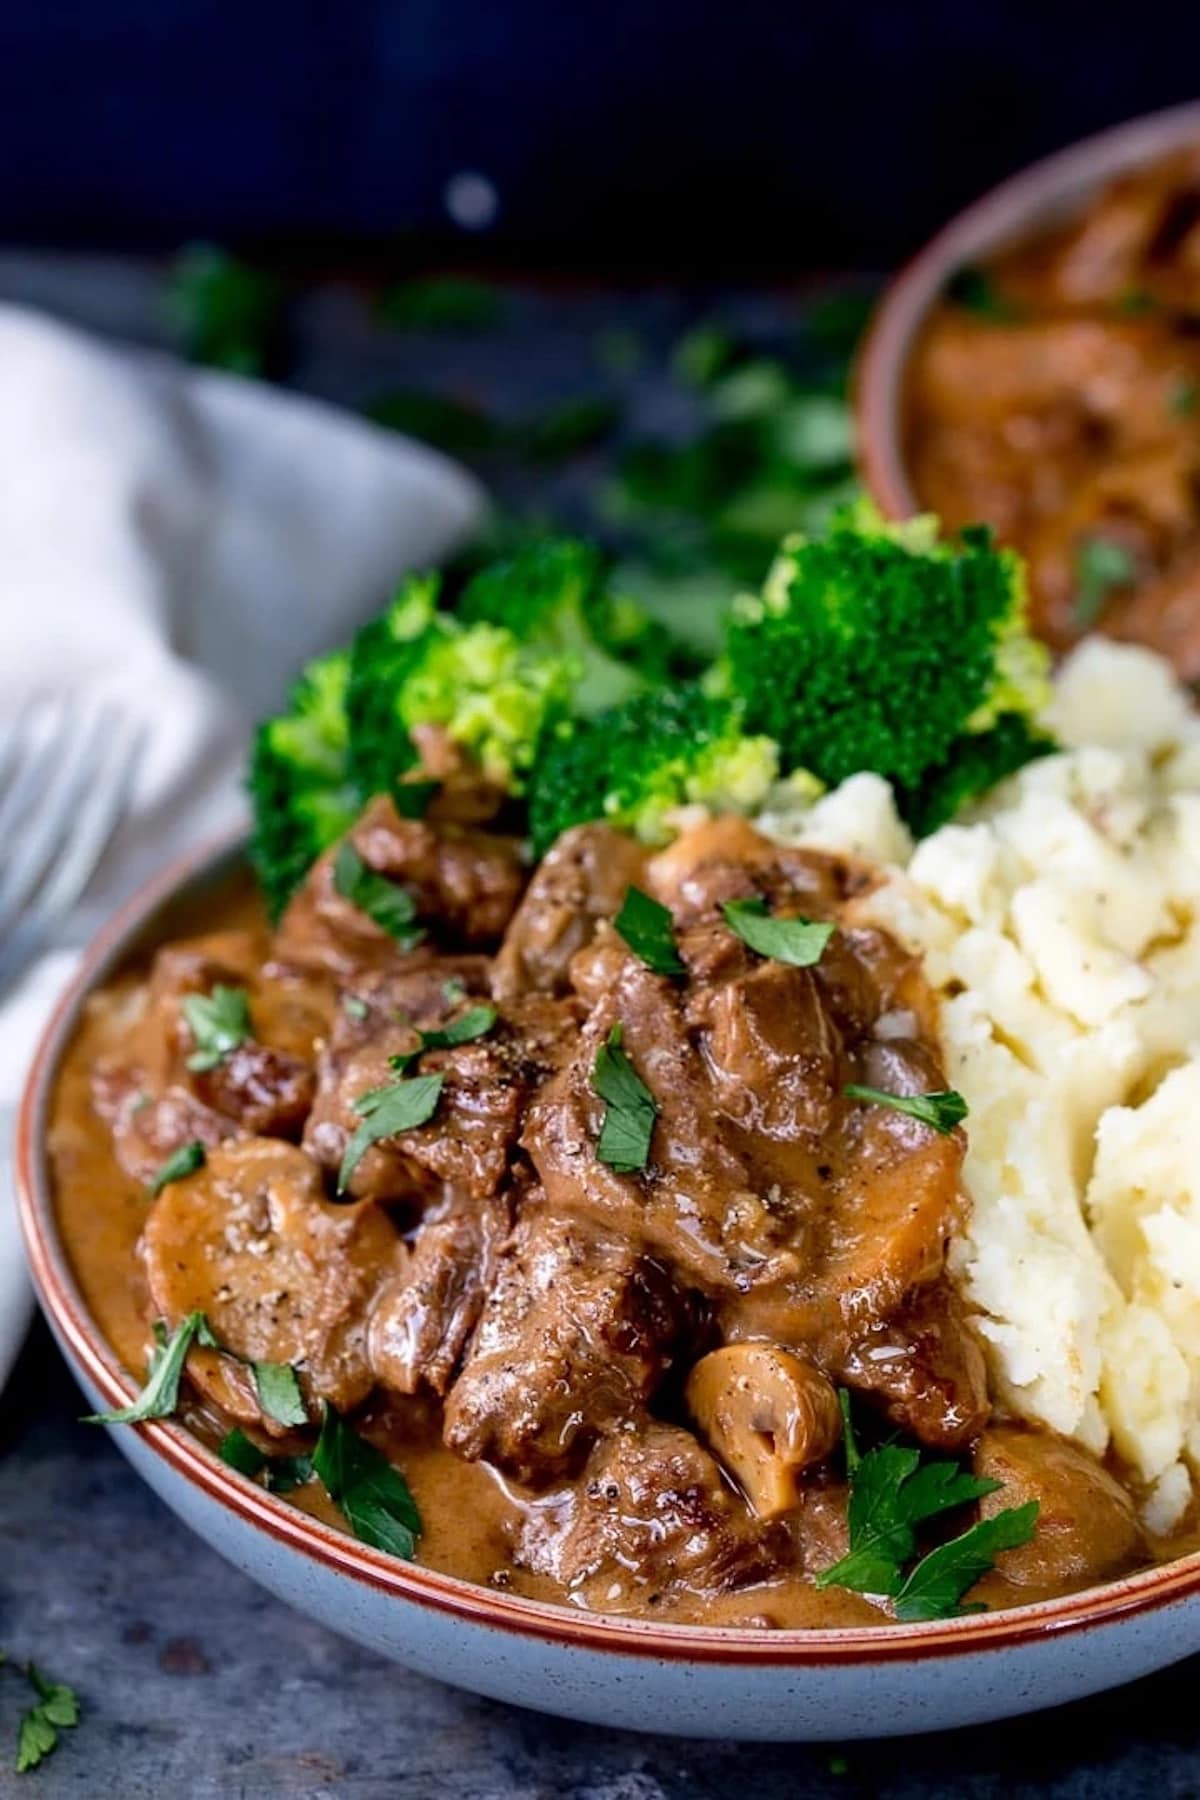 Steak Diane in a bowl, served with mashed potatoes and broccoli.